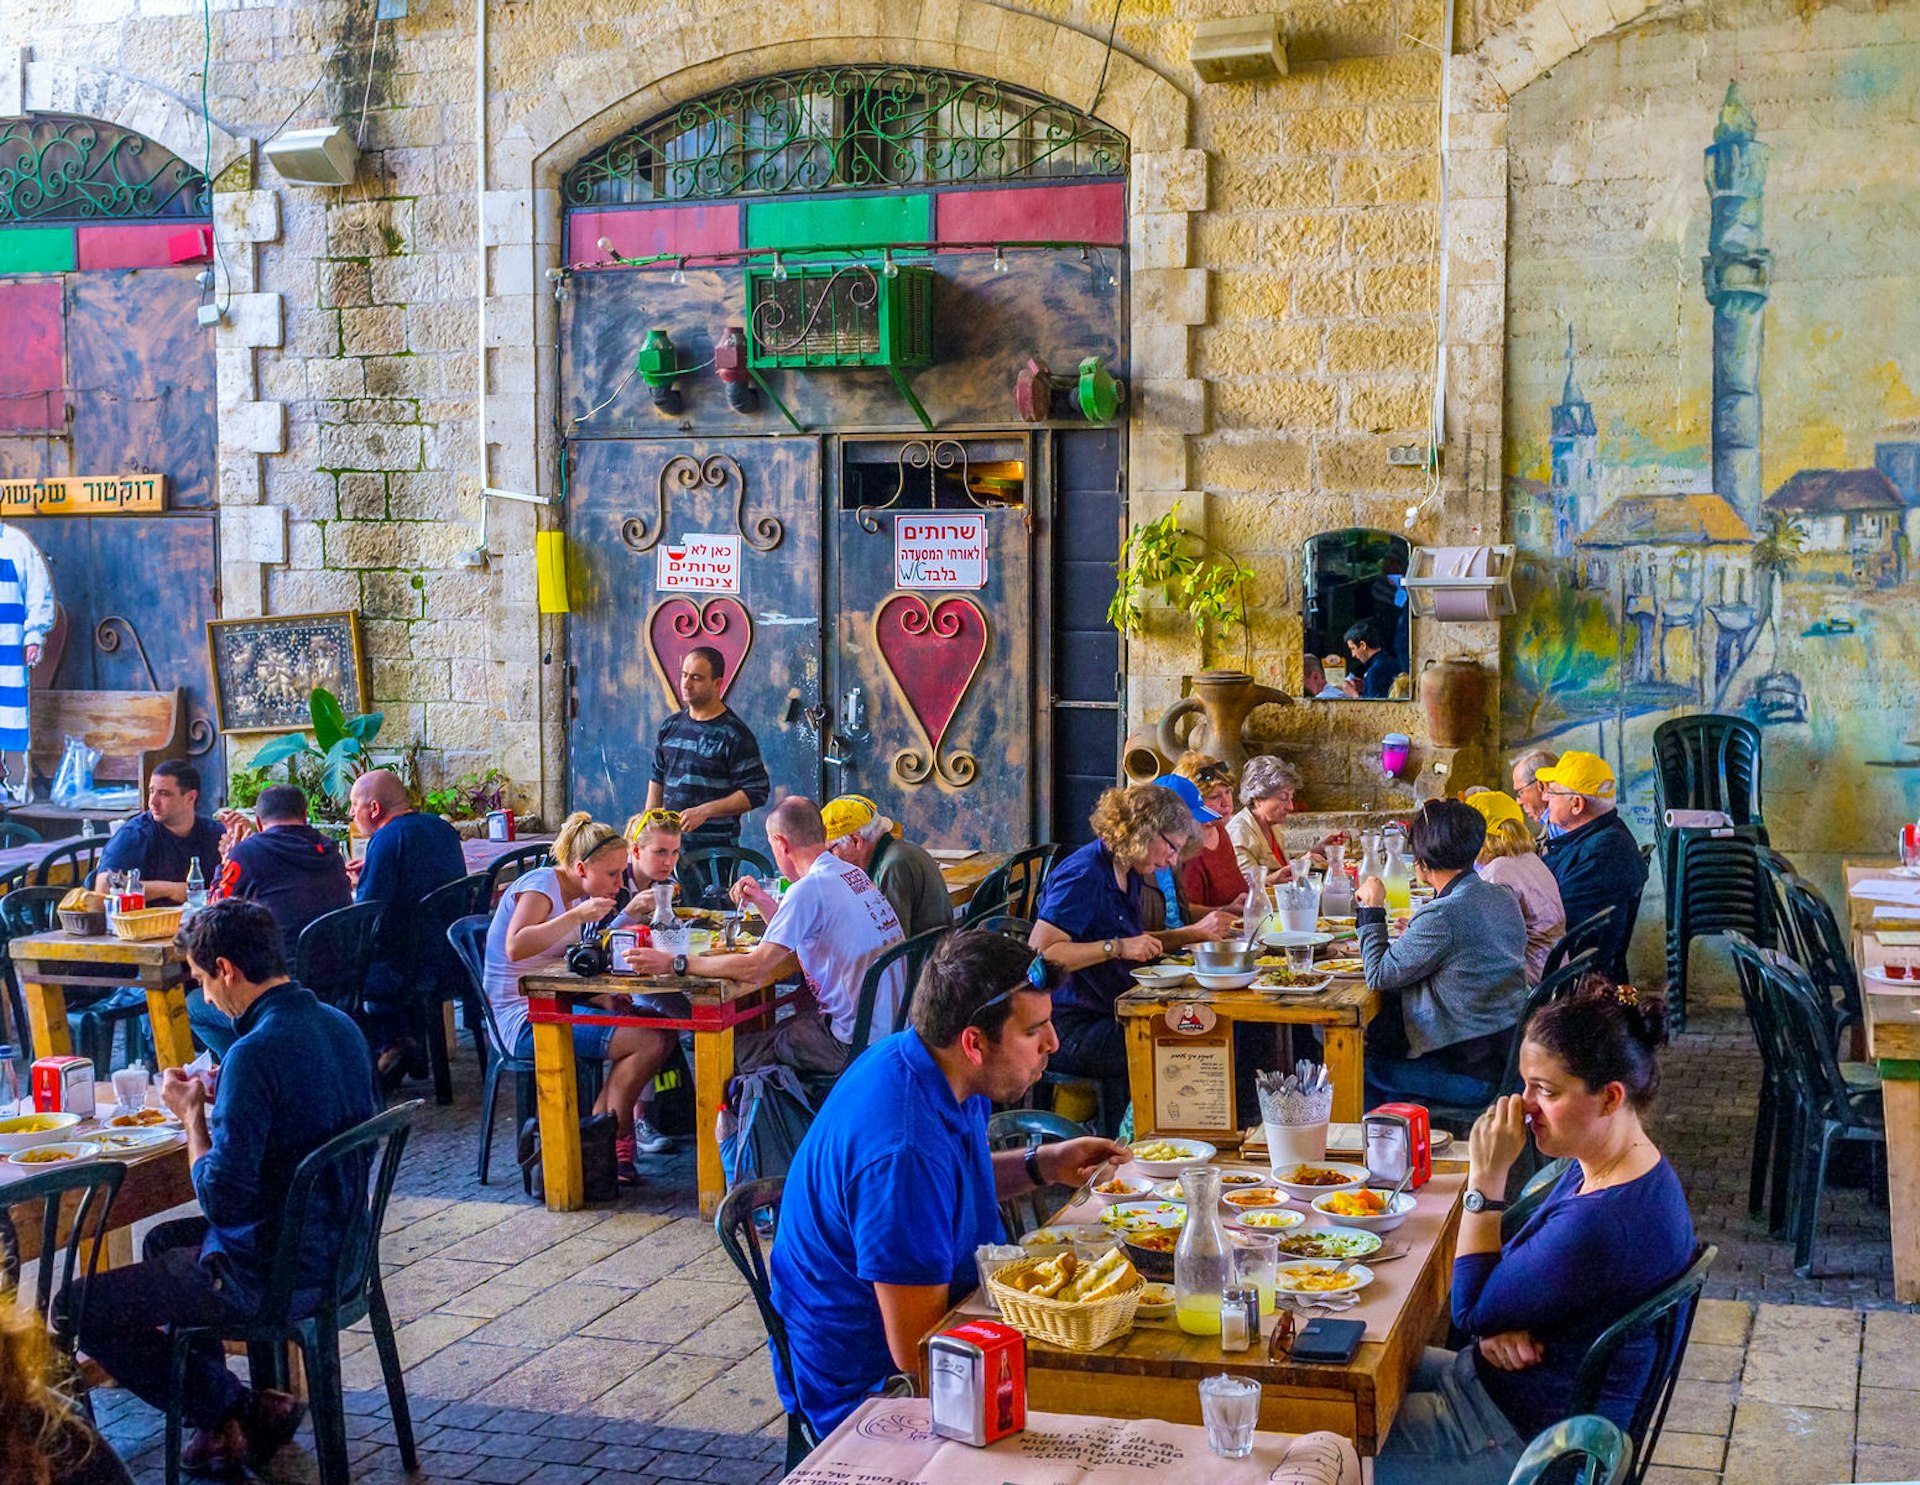 Patrons eat in an alley in Jaffa Flea Market, the wall lined with colourful murals and decorations.